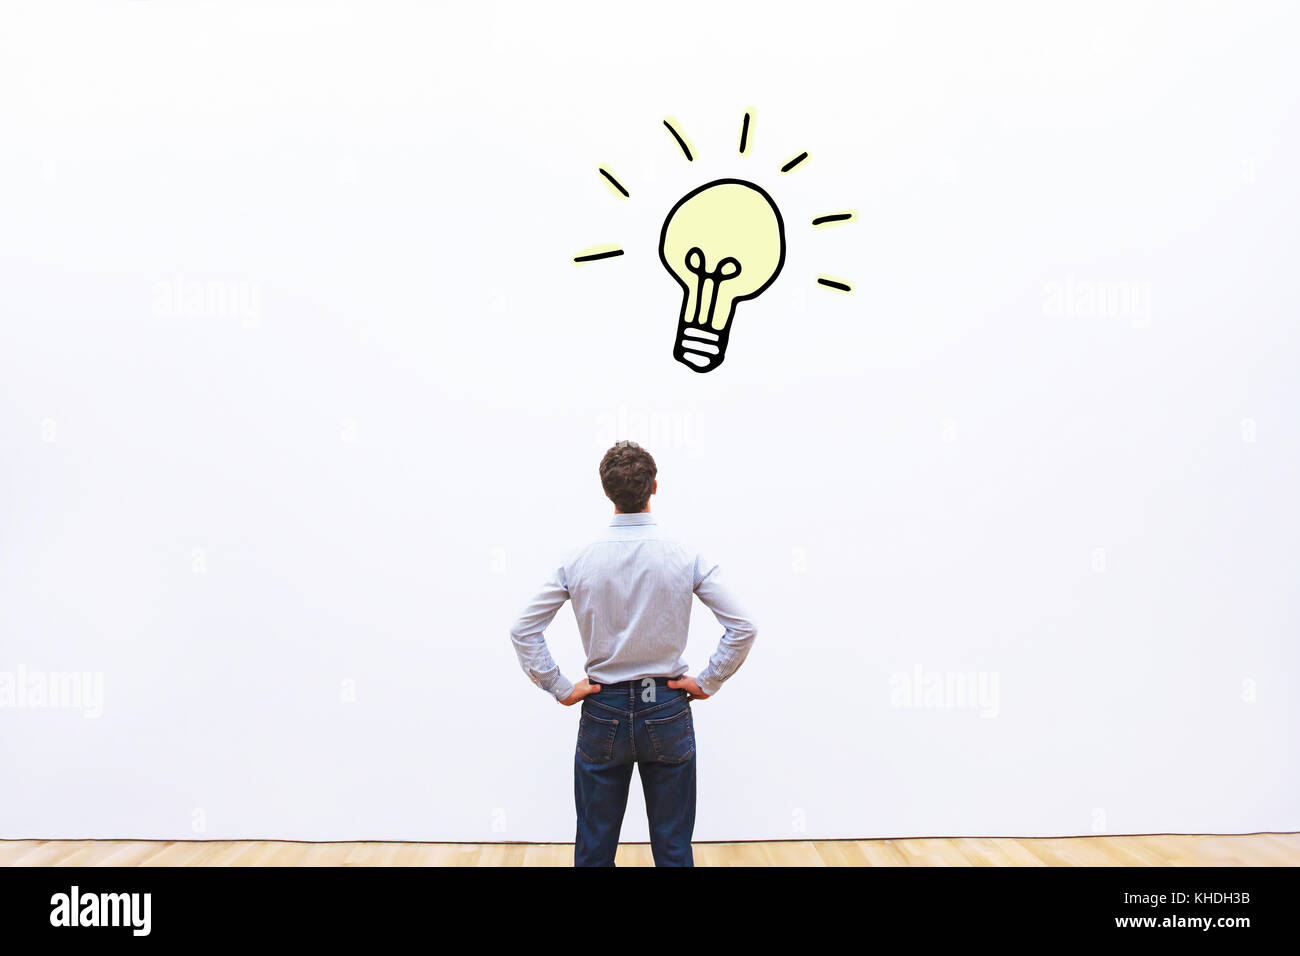 concept of new business idea or innovation, creativity Stock Photo